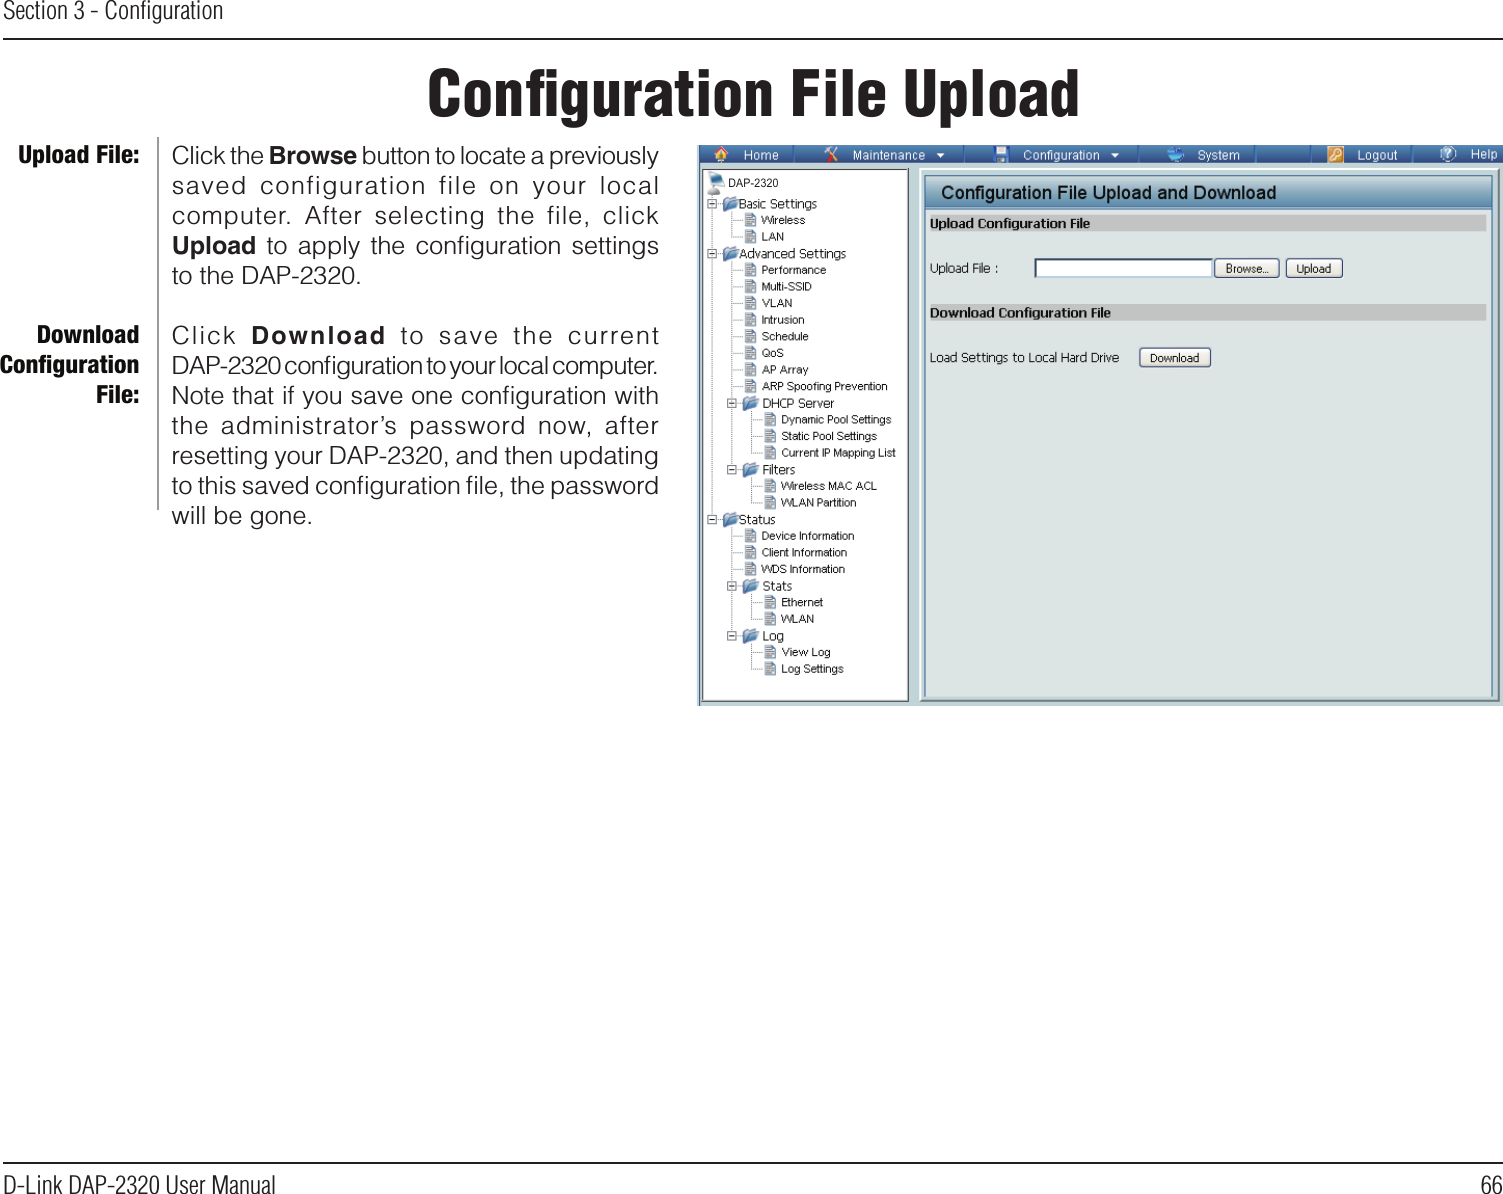 66D-Link DAP-2320 User ManualSection 3 - ConﬁgurationConﬁguration File UploadClick the Browse button to locate a previously saved  configuration  file  on  your  local computer.  After  selecting  the  file,  click Upload  to  apply  the  conﬁguration  settings to the DAP-2320.Click  Download  to  save  the  currentDAP-2320 conﬁguration to your local computer. Note that if you save one conﬁguration with the  administrator’s  password  now,  after resetting your DAP-2320, and then updating to this saved conﬁguration ﬁle, the password will be gone.Upload File:Download Conﬁguration File:DAP-2320